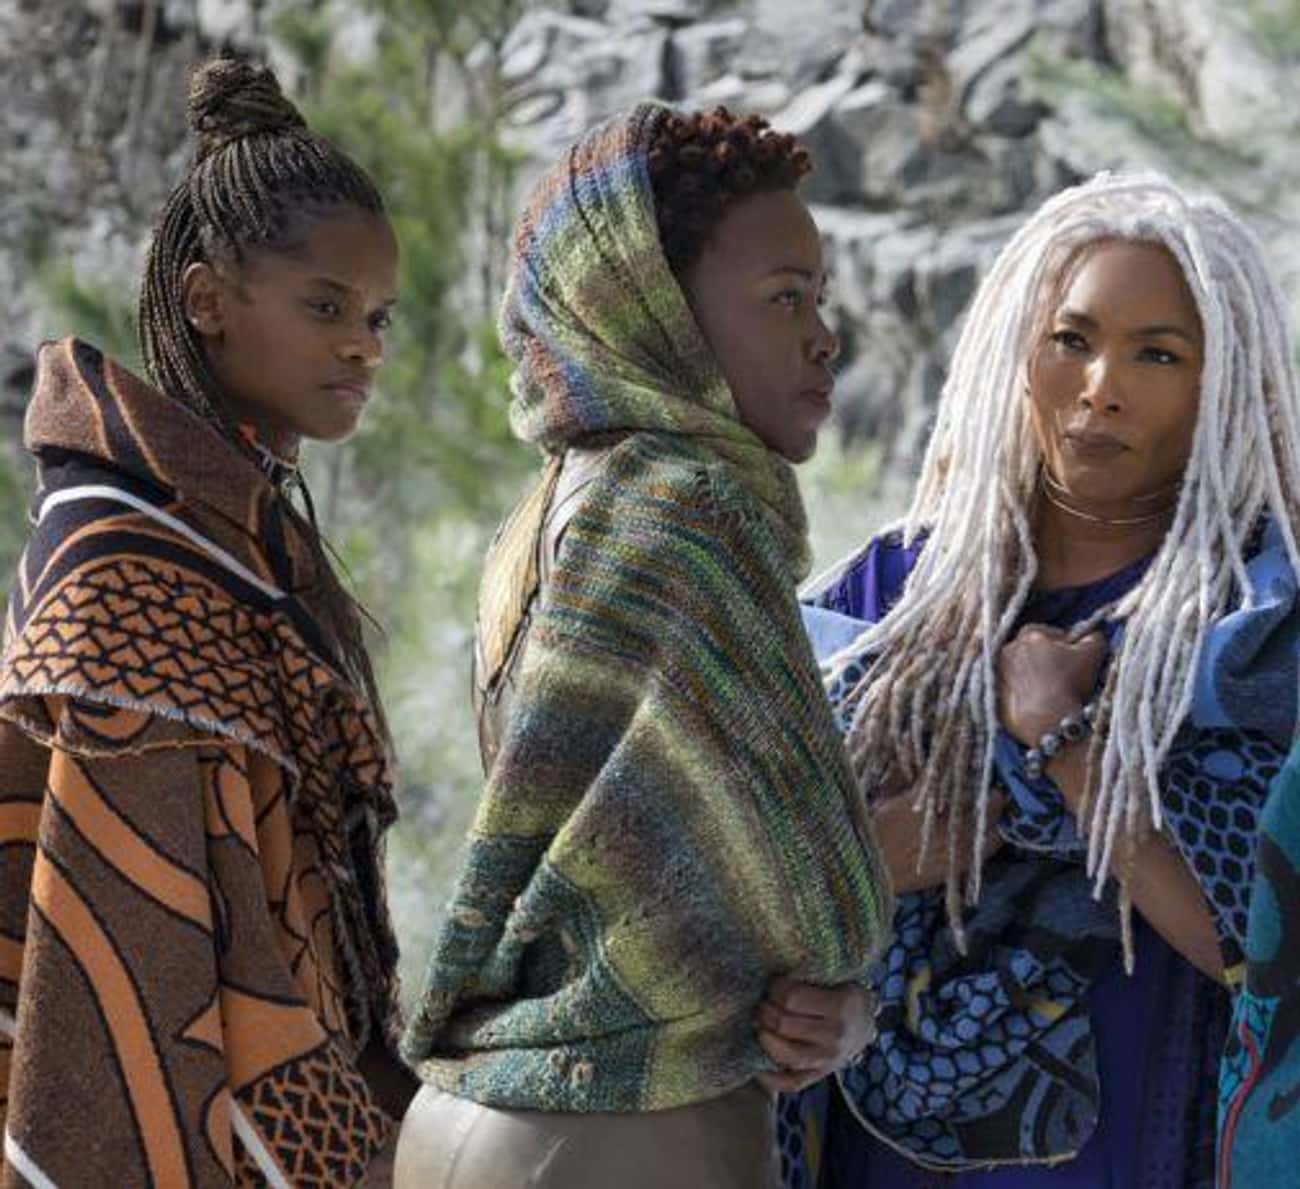 The Hair And Makeup In Black Panther Pay Homage To The Diversity Of African Beauty